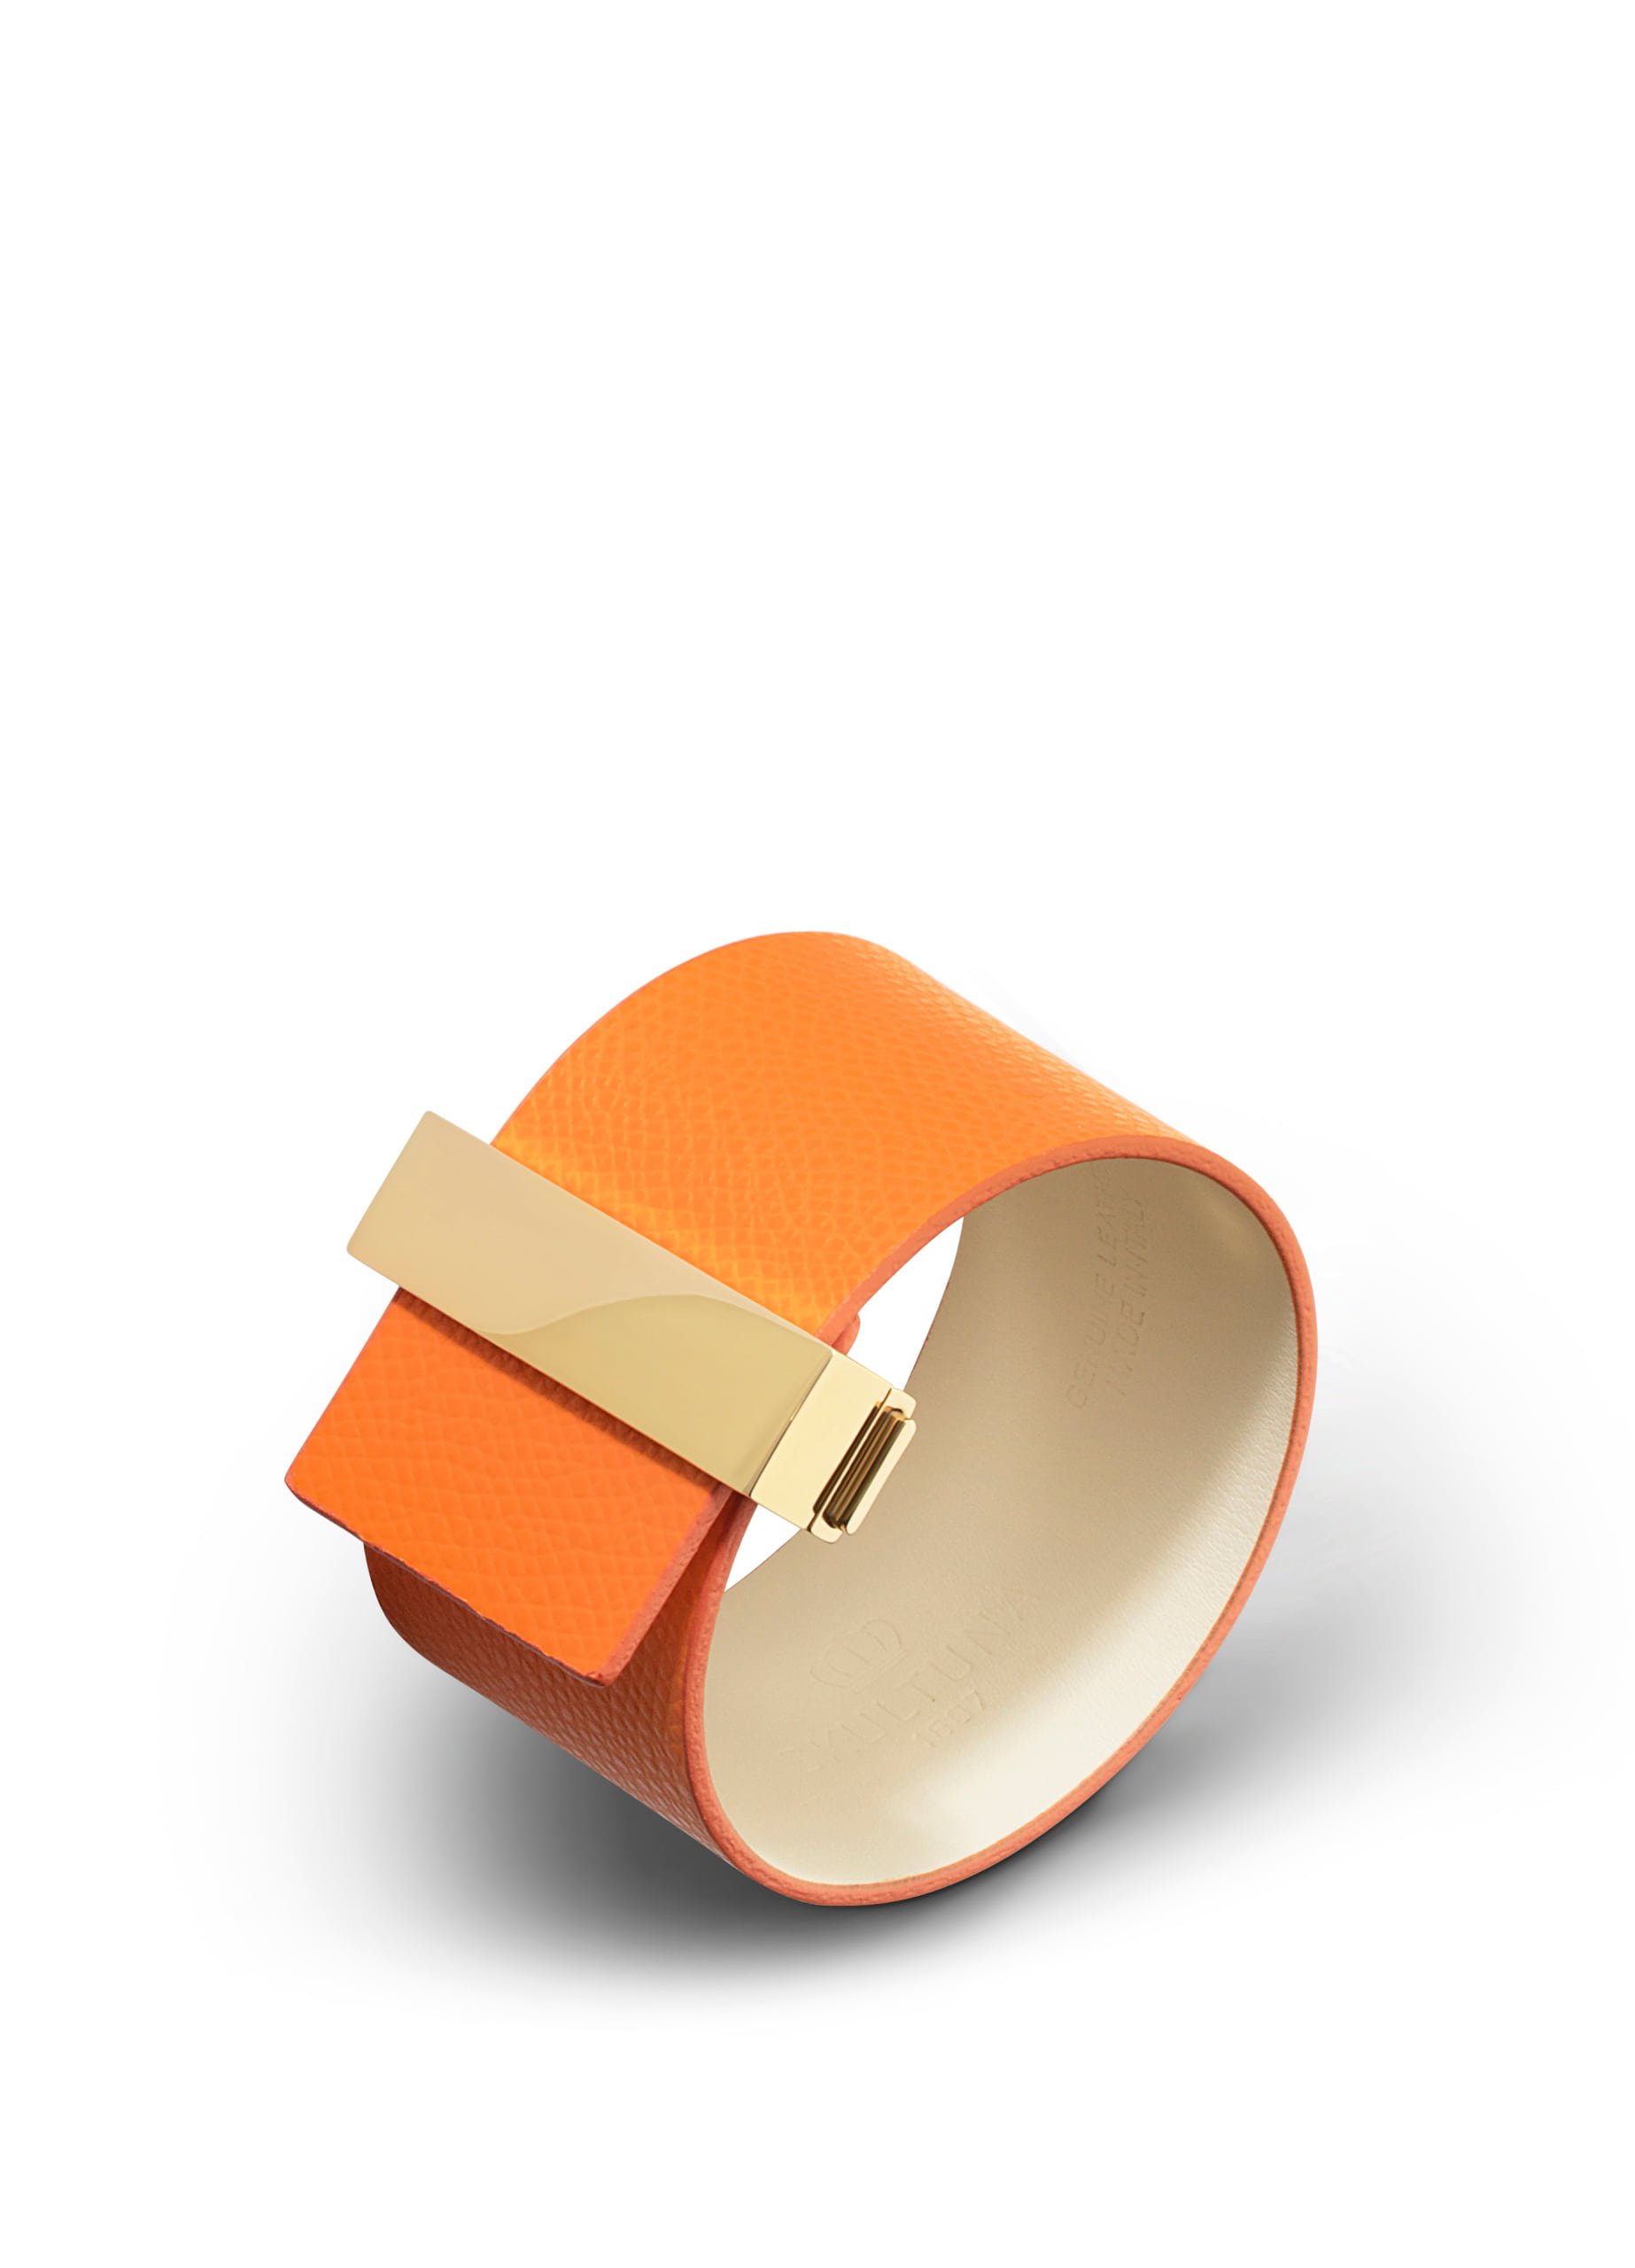 Wide leather bracelet with lock - Orange with gold plated